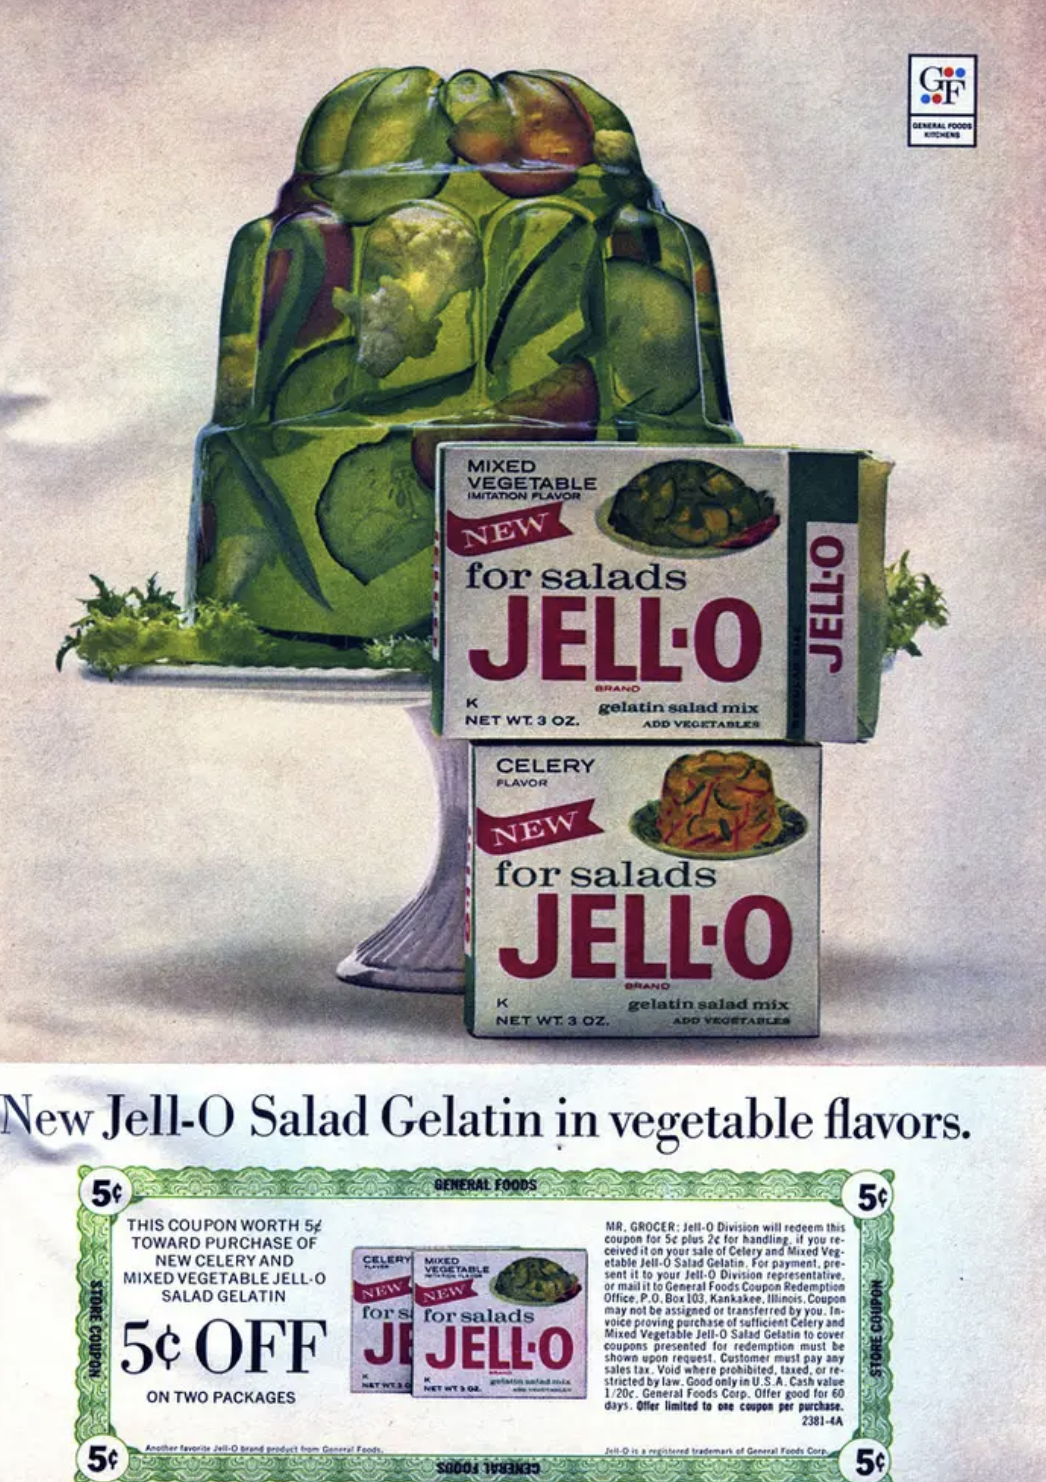 vintage jello ads - Mixed Vegetable New for salads JellO gentin JellO Celery New for salads Jello New JellO Salad Gelatin in vegetable flavors. 5 This Coupon Worth Toward Purchase Of New Celery And Moed Vegetable JellO Salad Gelatin for for salads 5 Off J